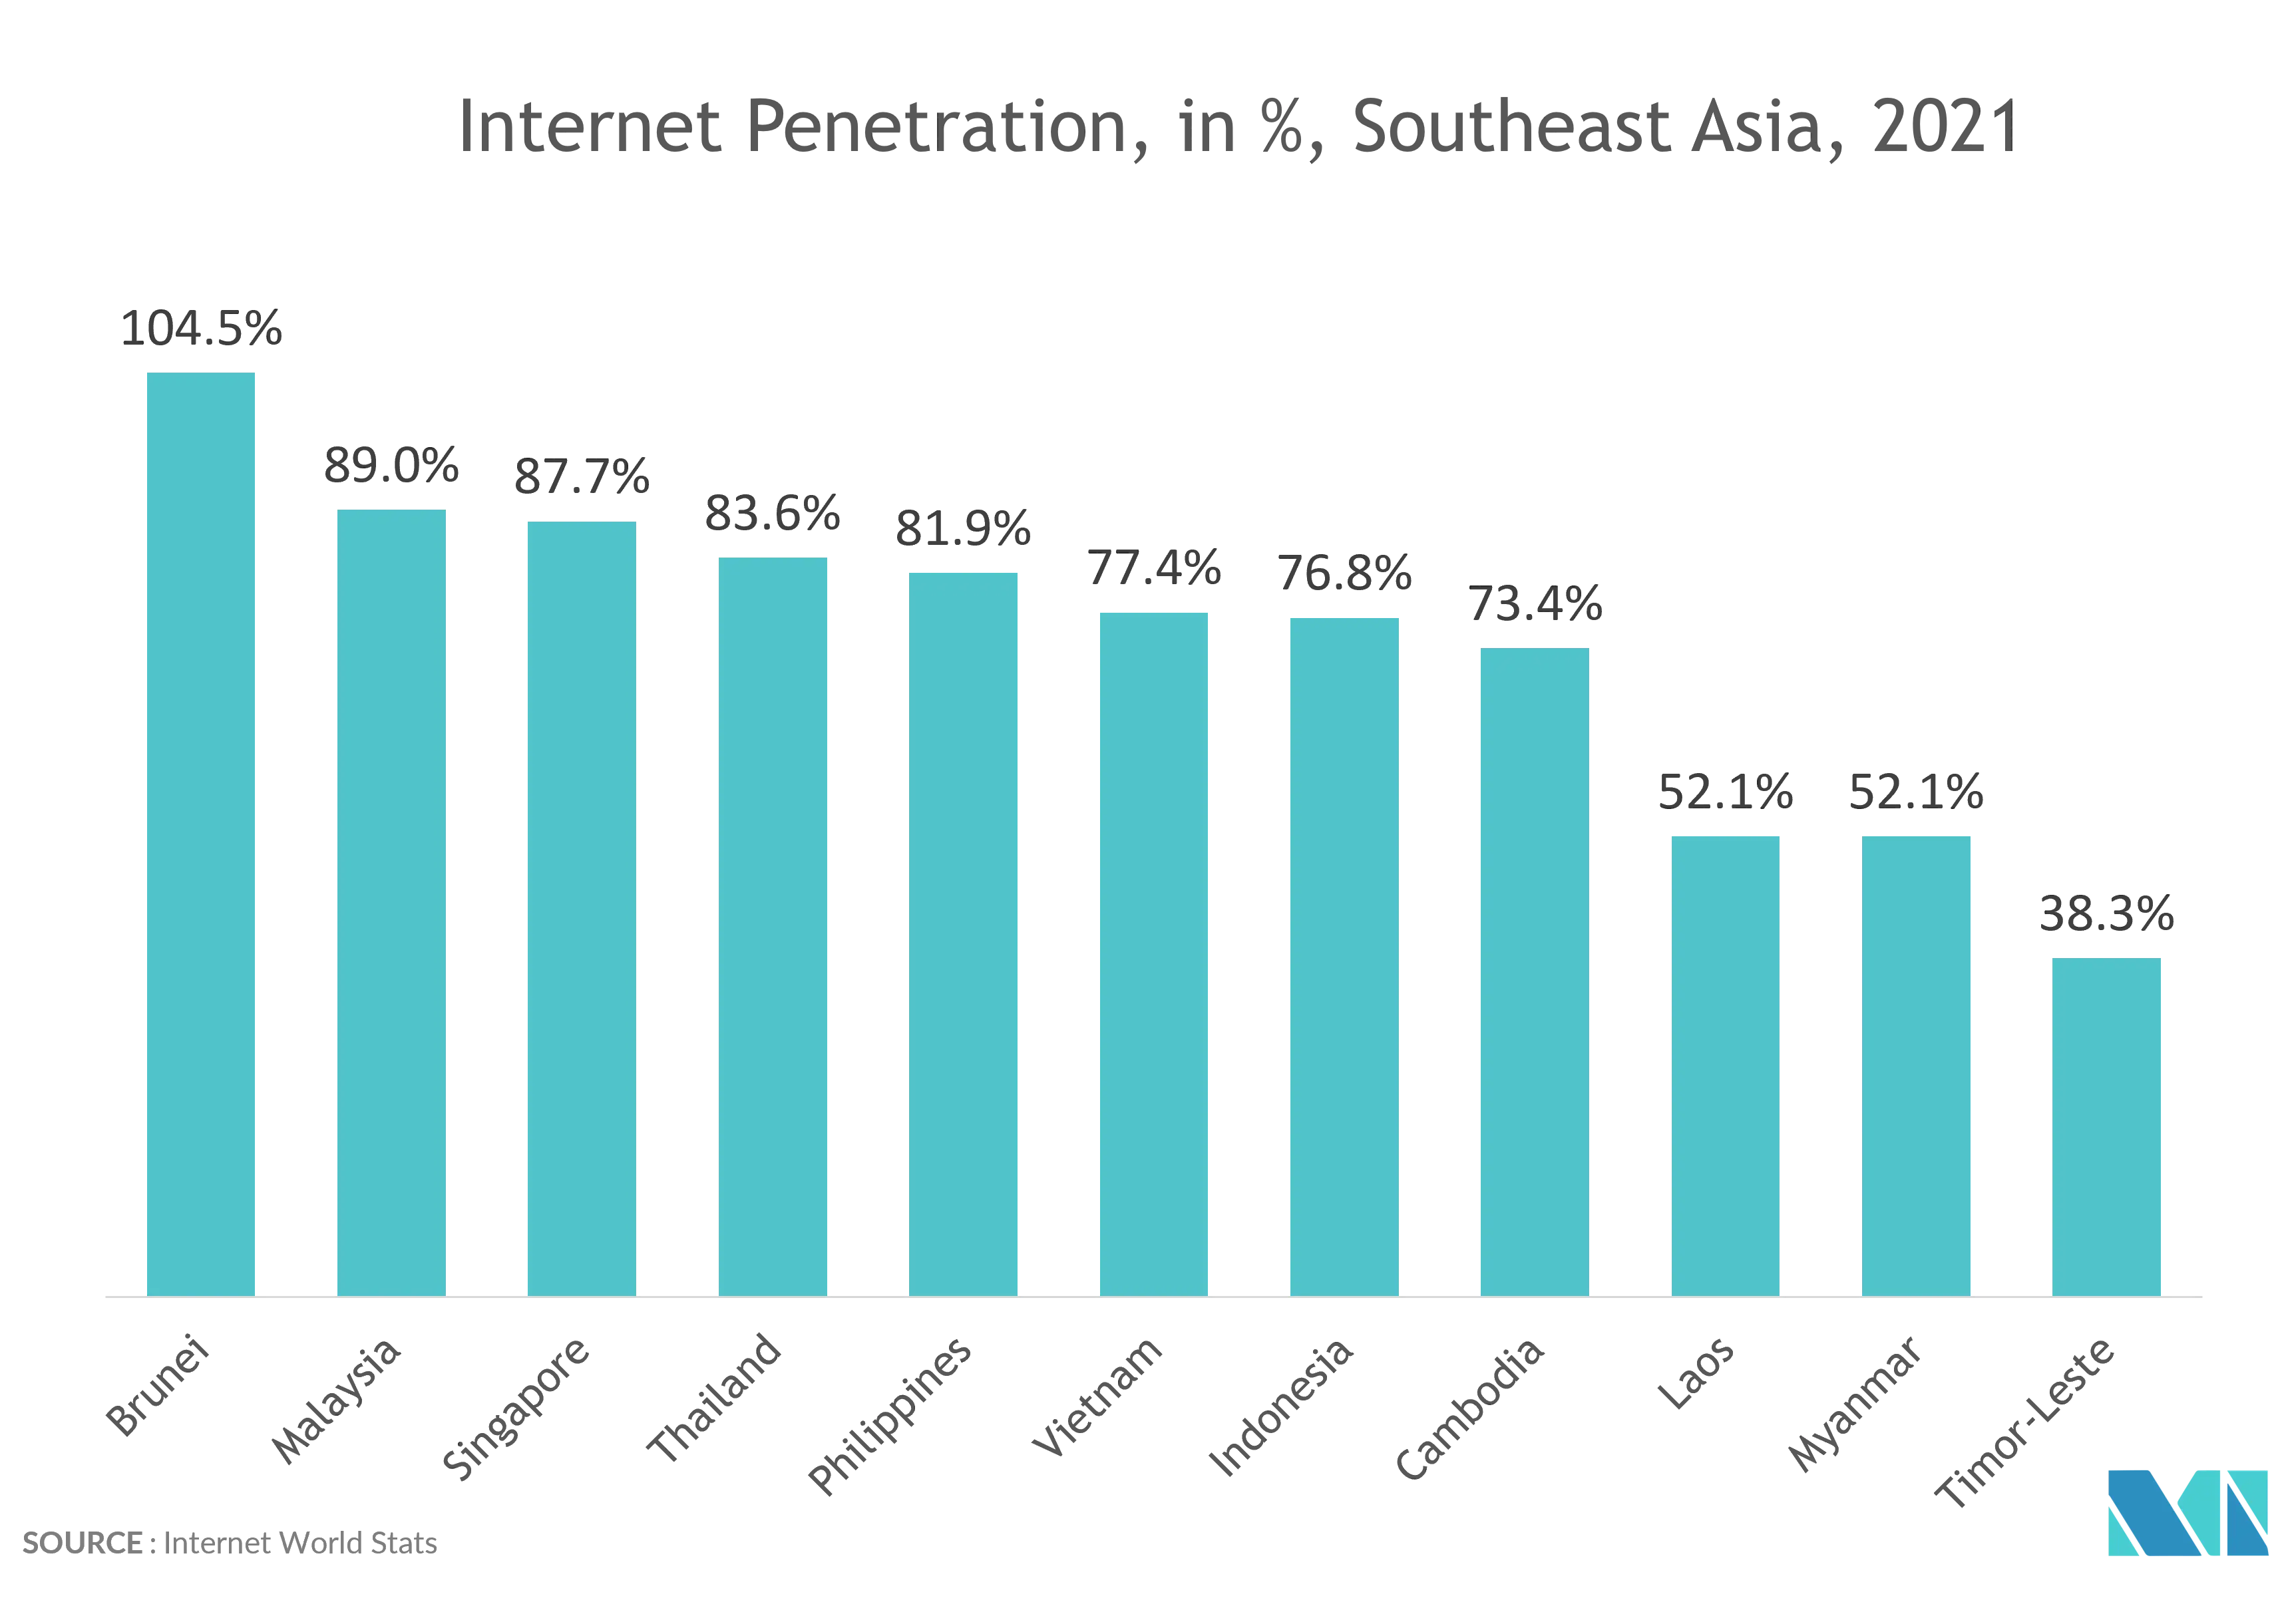 Southeast Asia Gaming Market: Internet Penetration, in %, Southeast Asia, 2021